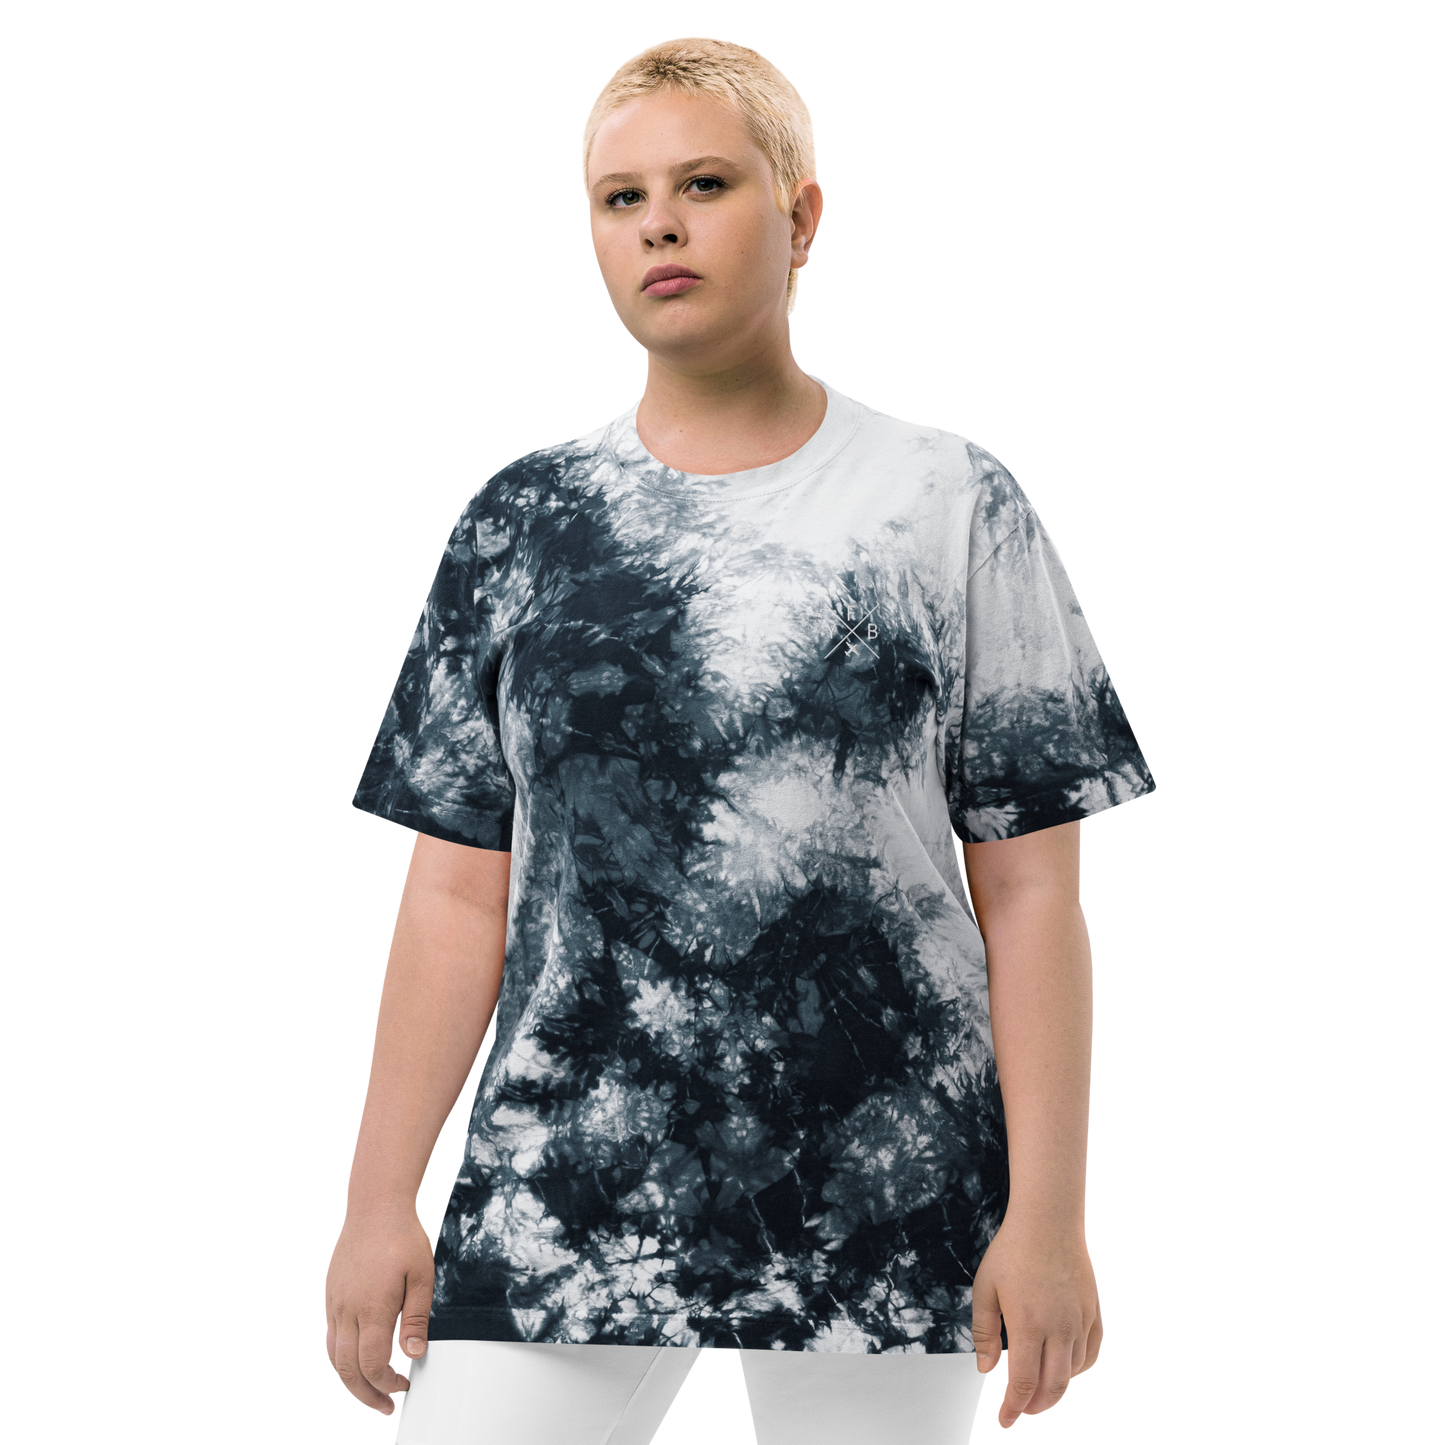 YHM Designs - YFB Iqaluit Oversized Tie-Dye T-Shirt - Crossed-X Design with Airport Code and Vintage Propliner - White Embroidery - Image 16